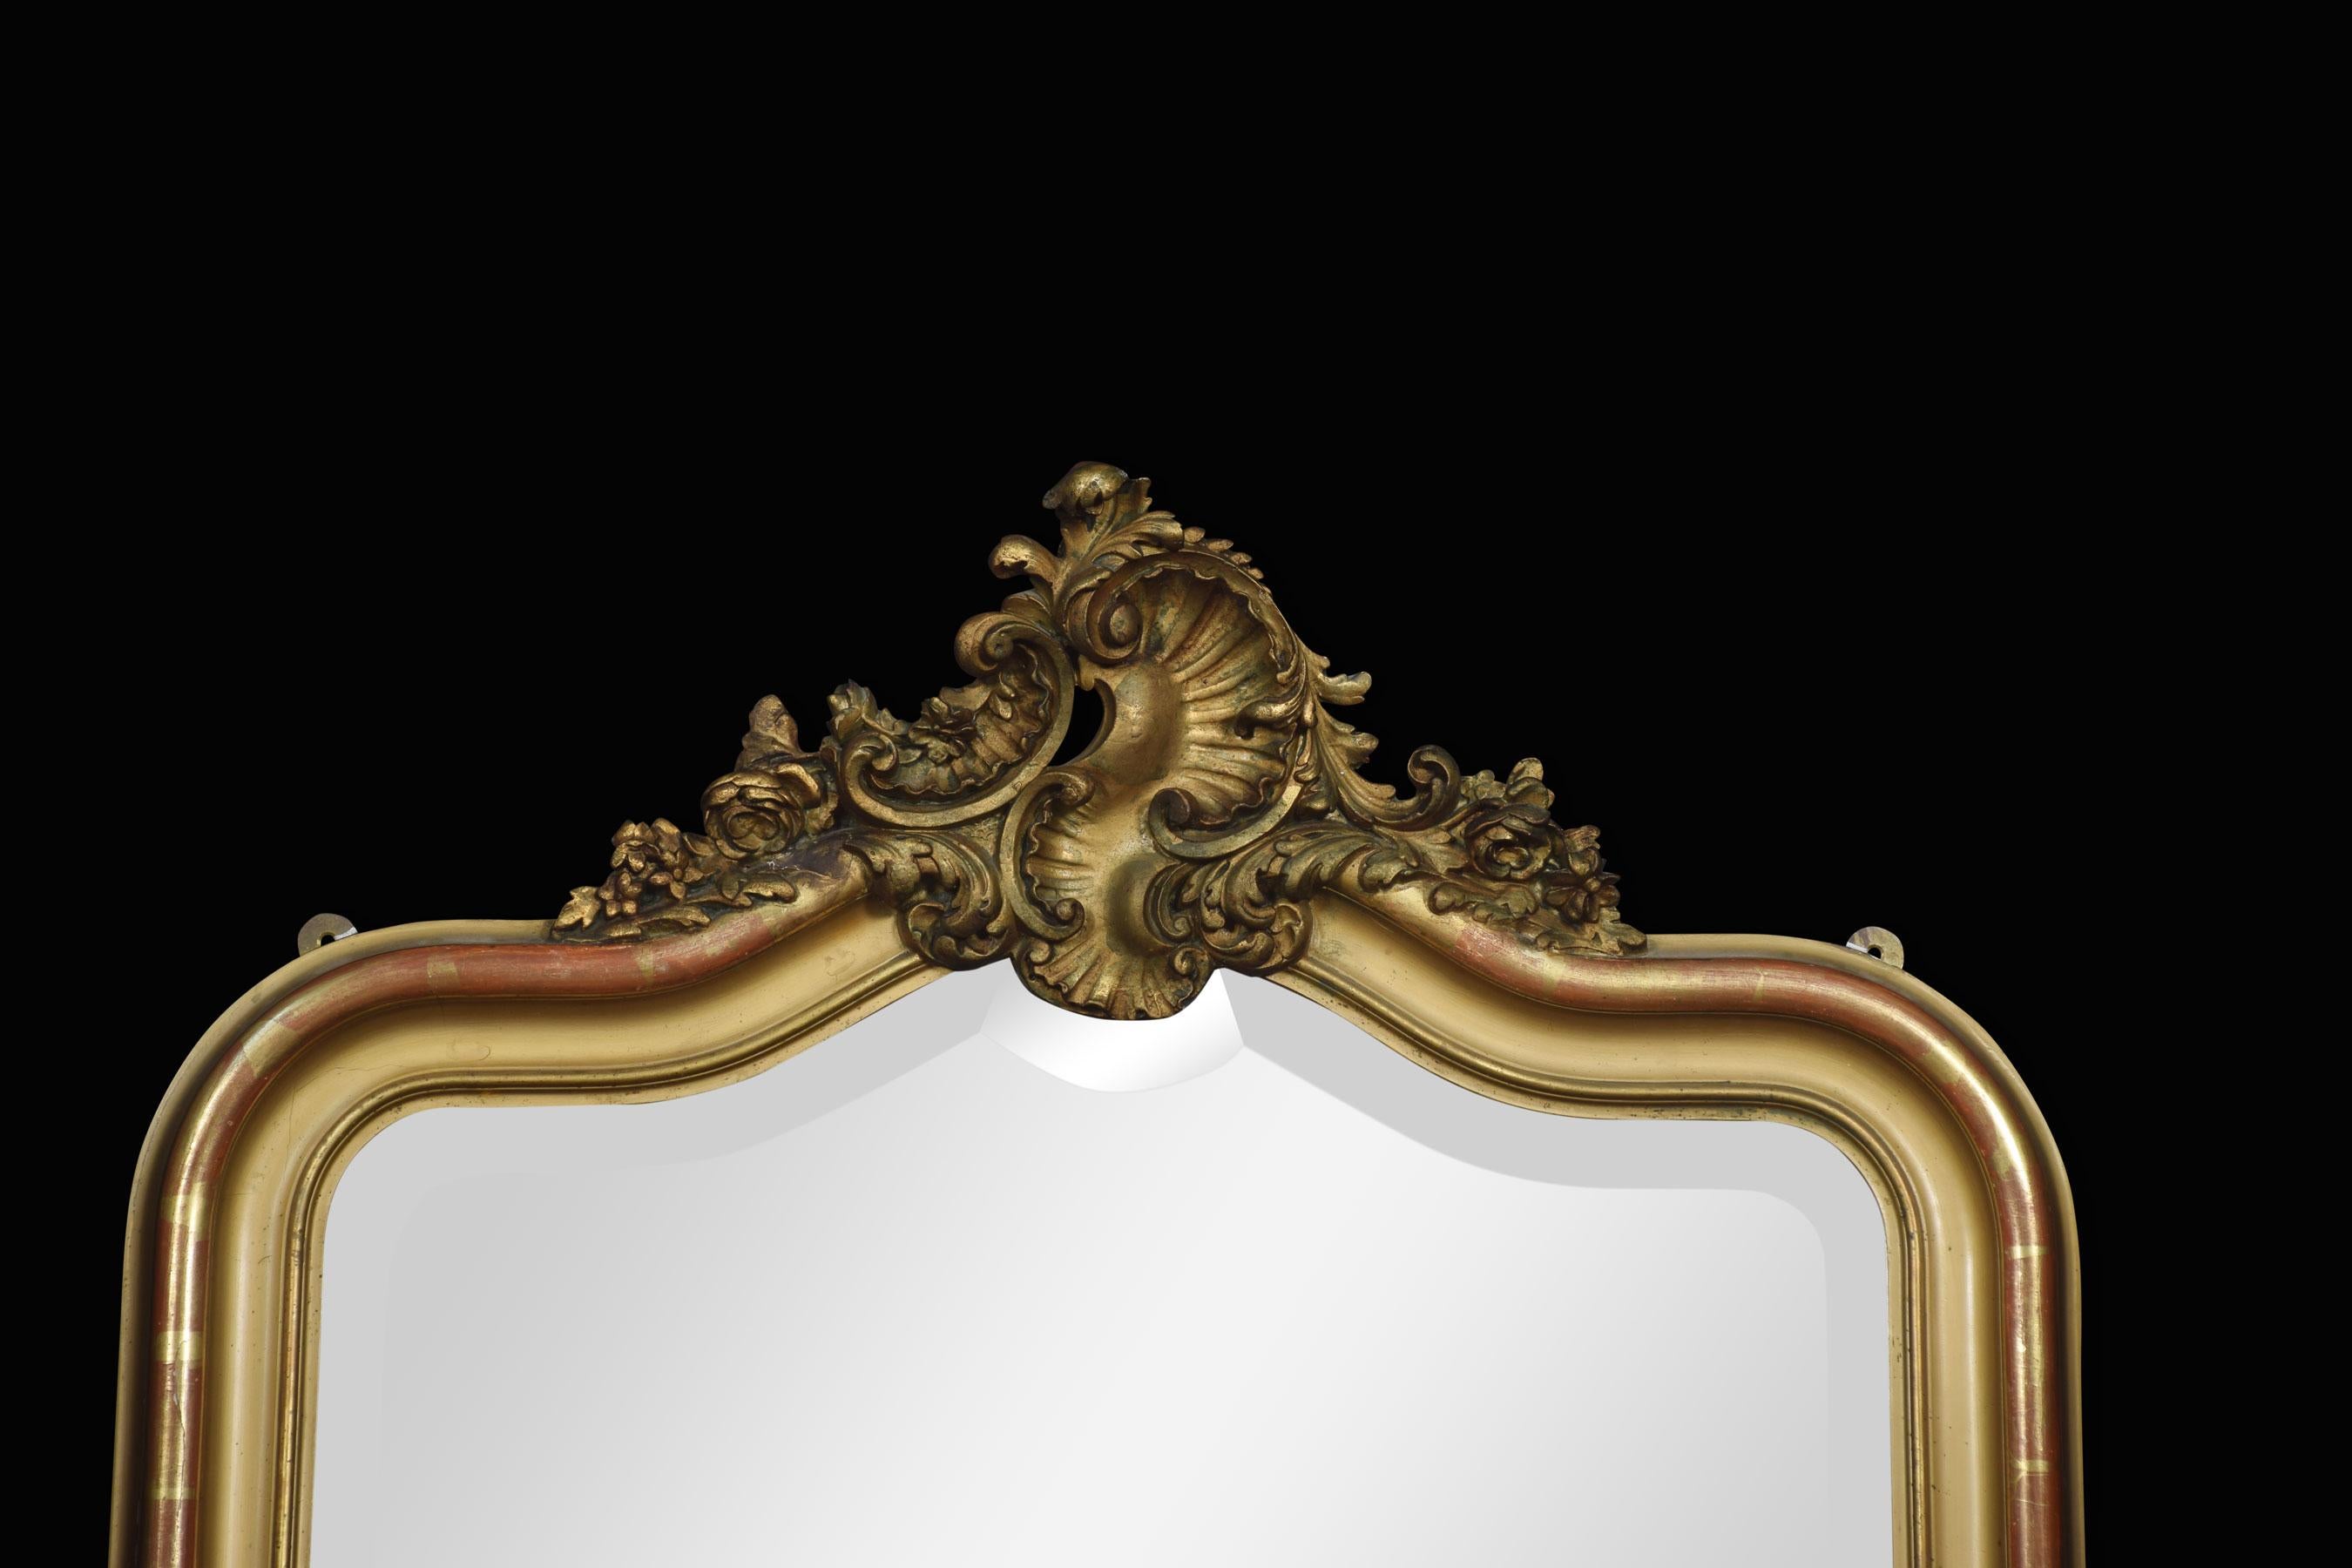 French Louis XVI style giltwood wall mirror, with gilt shell and scrolling foliate crest flanked by swept leafy spandrels, to the shaped original beveled mirrored plate within a molded frame.
Dimensions
Height 51 inches
Width 36 inches
Depth 3